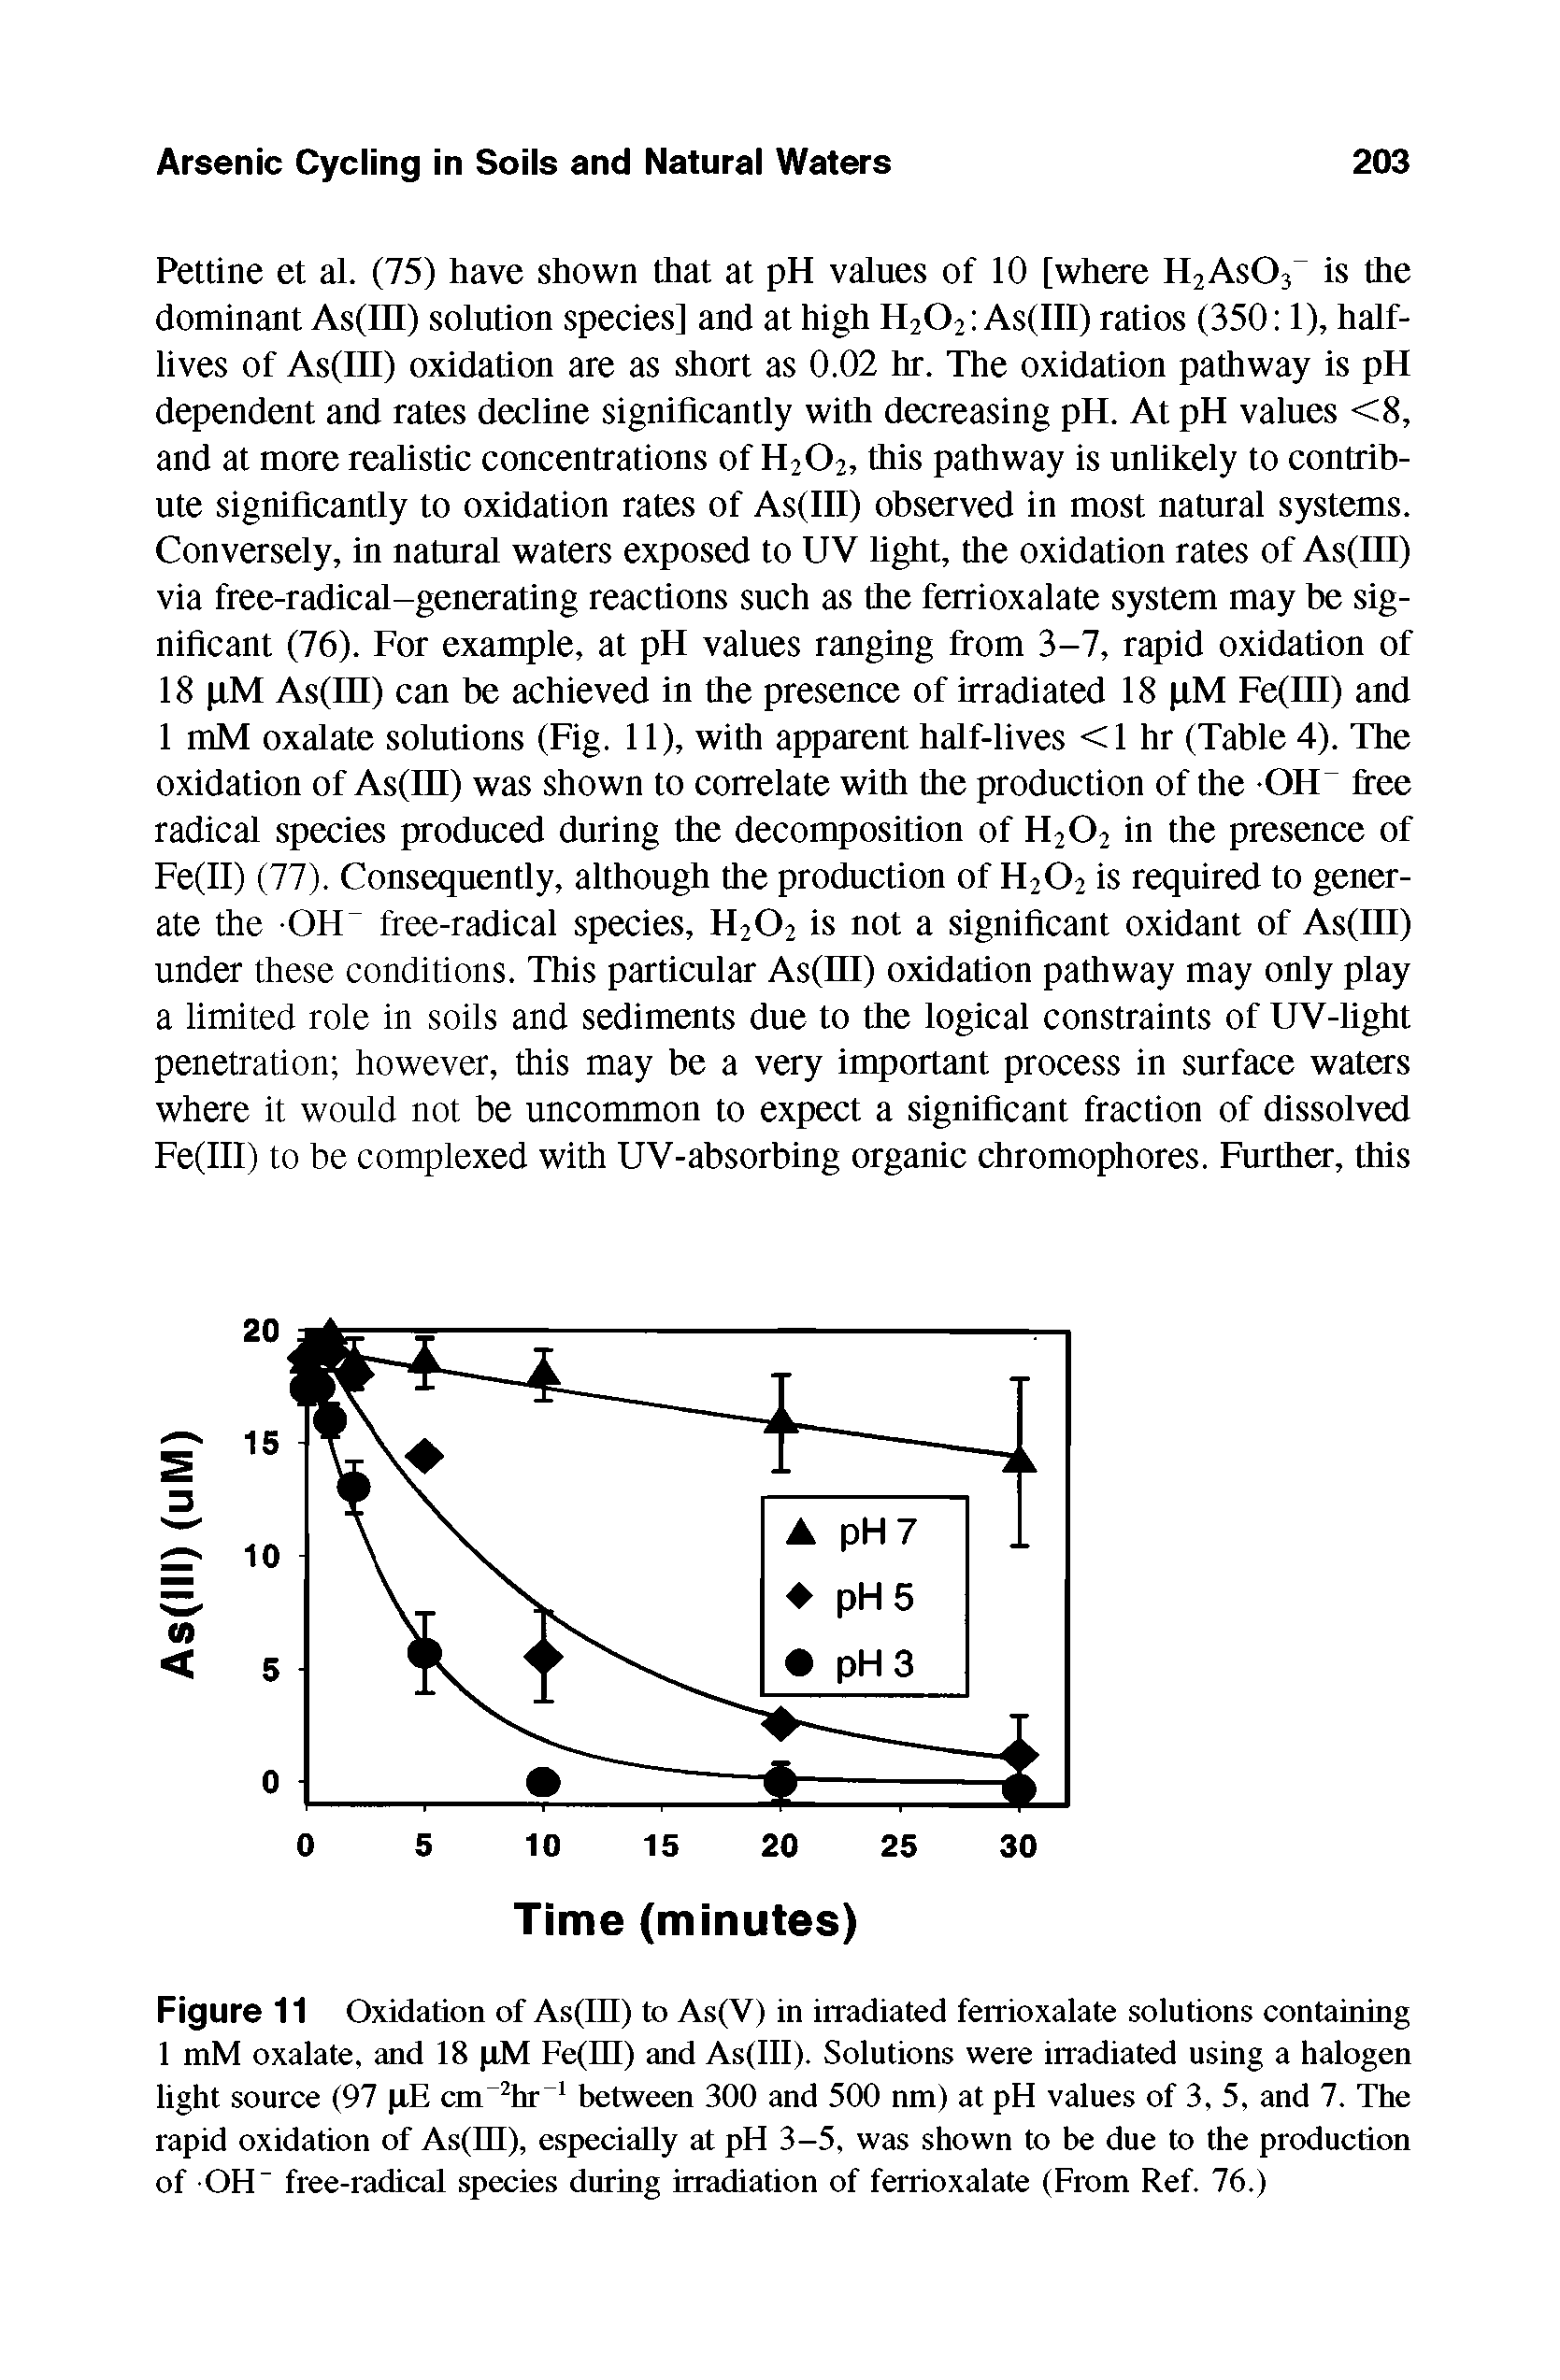 Figure 11 Oxidation of As(IIt) to As(V) in irradiated ferrioxalate solutions containing 1 mM oxalate, and 18 pM Fe(III) and As(lll). Solutions were irradiated using a halogen light source (97 pE cm hr between 300 and 500 nm) at pH values of 3, 5, and 7. The rapid oxidation of As(III), especially at pH 3-5, was shown to be due to the production of OH" free-radical species during irradiation of ferrioxalate (From Ref. 76.)...